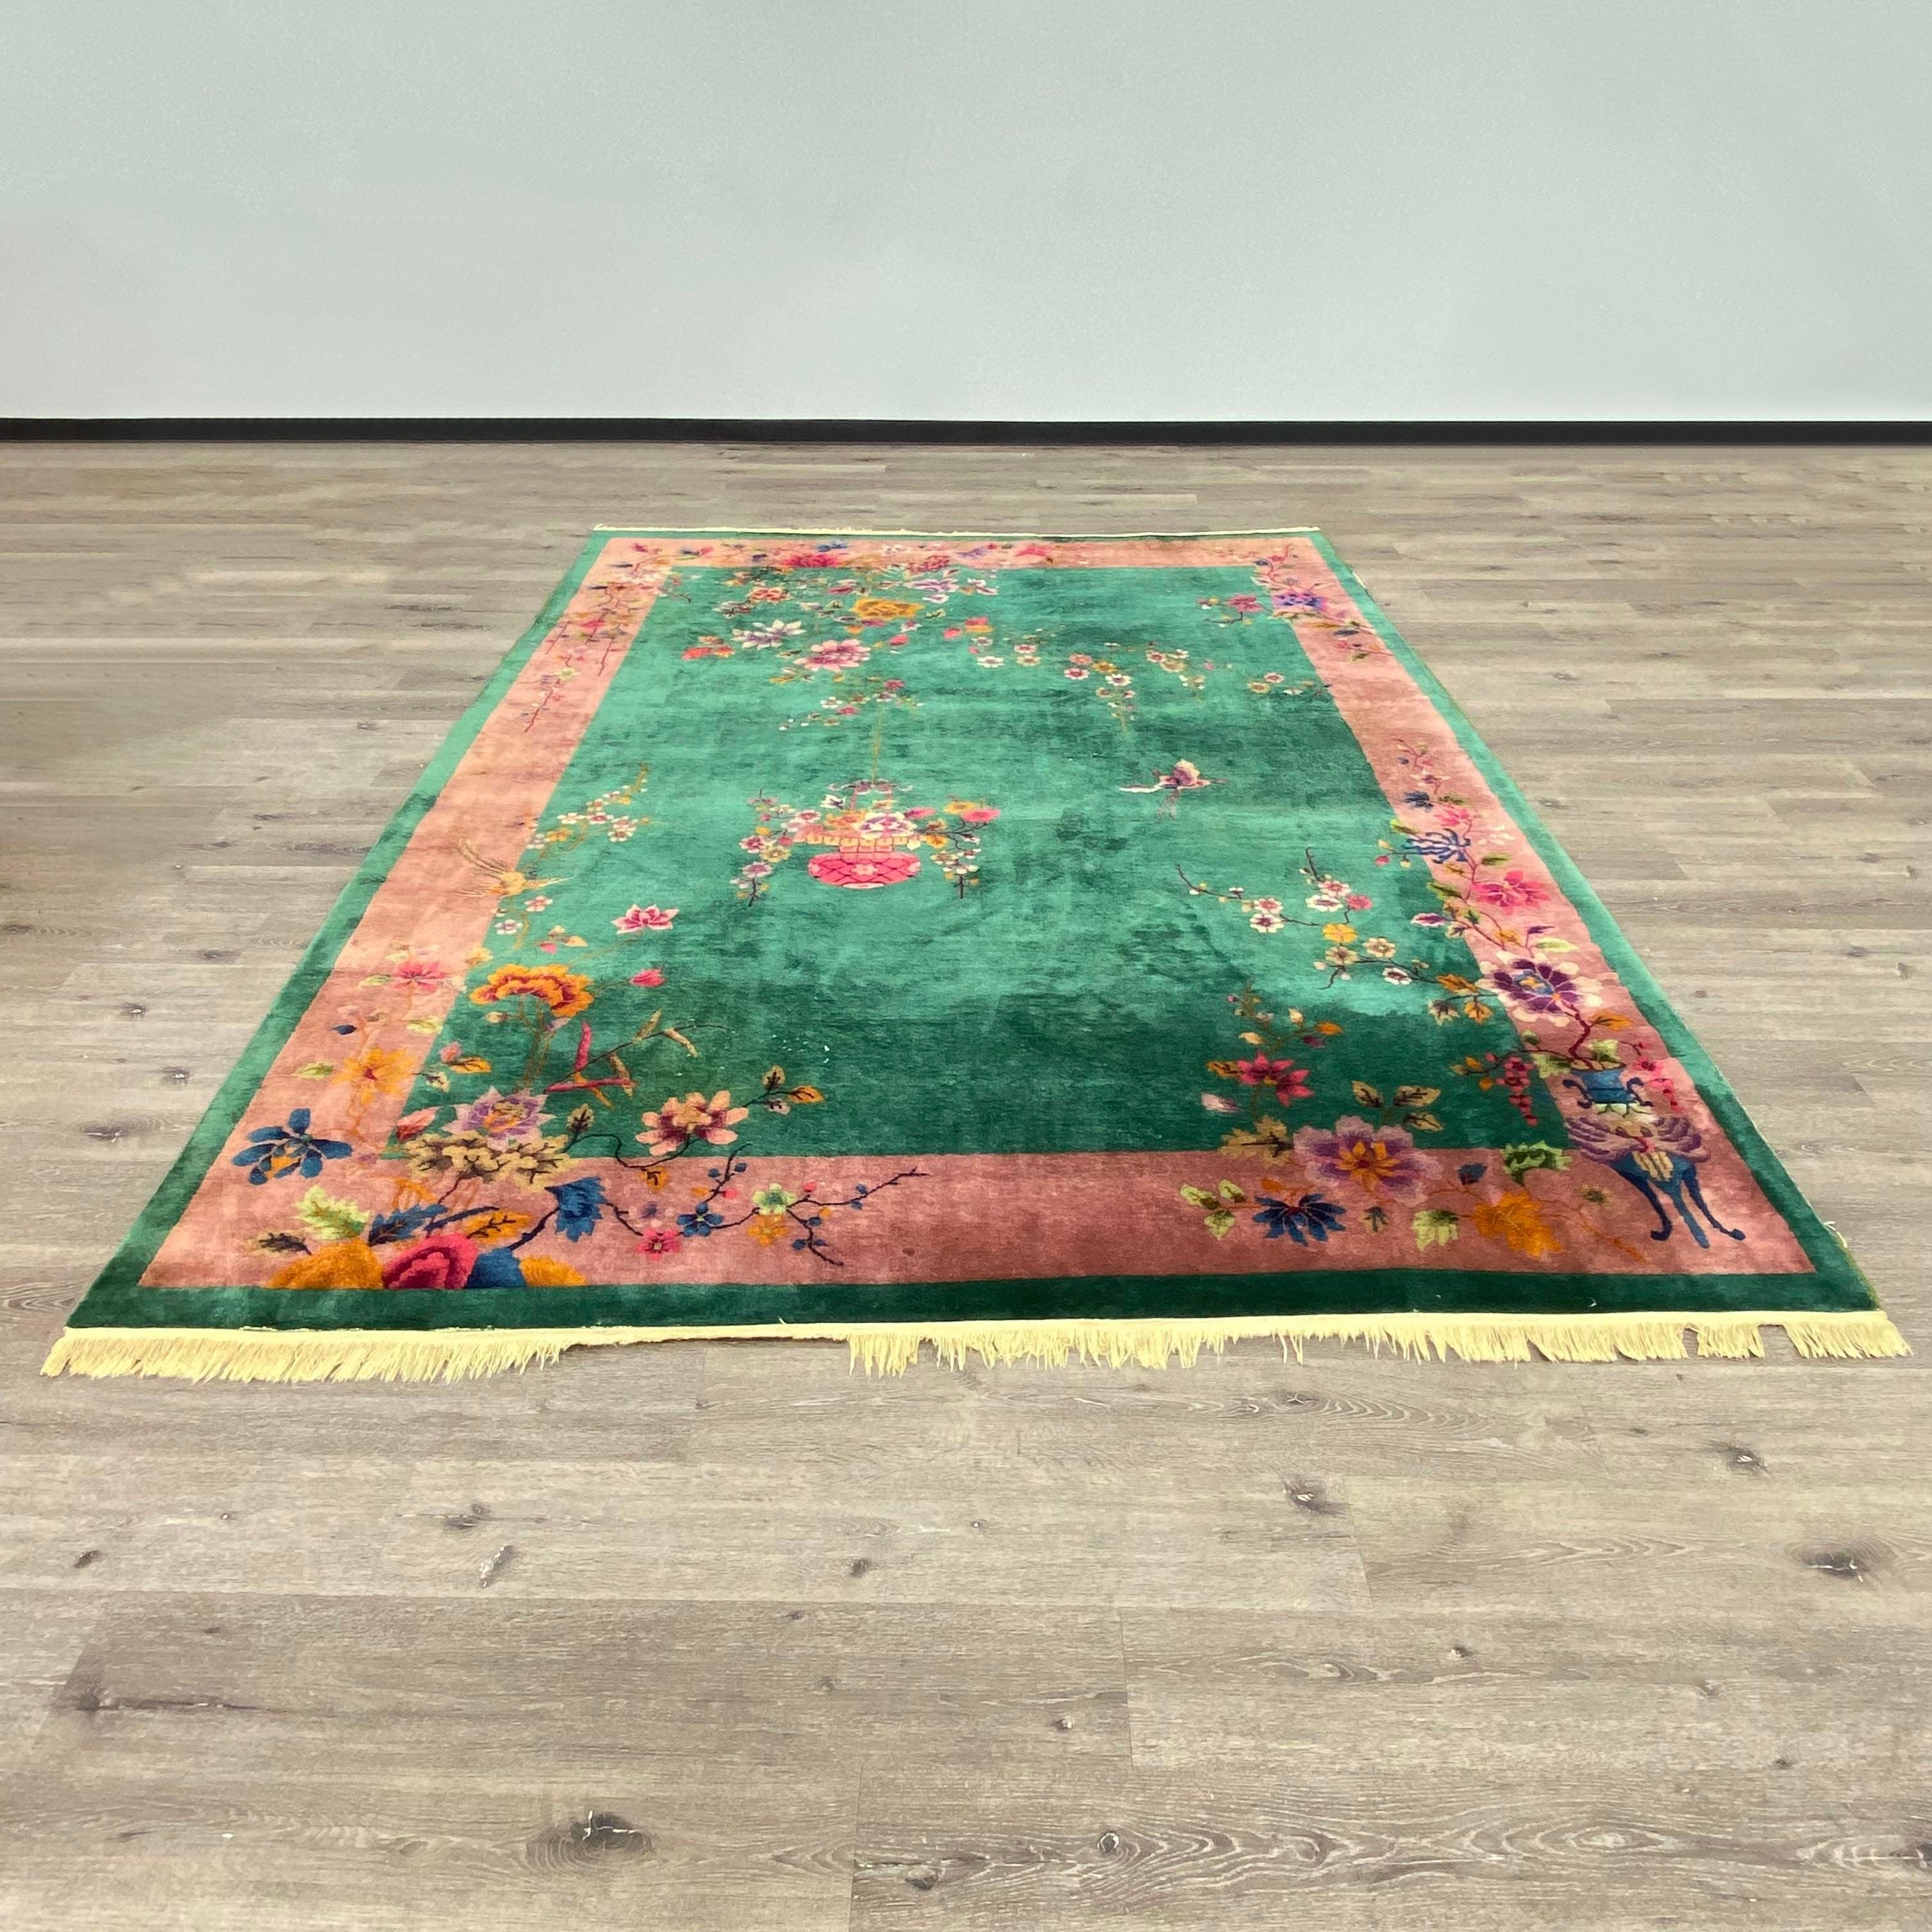 Antique Chinese Art Deco wool rug in stunning teal, pink, blues, and green with a floral motif. Floral arrangements throughout and with birds and a butterfly mid flight. Teal green rug with a pink border and florals sprinkled throughout. Measures: